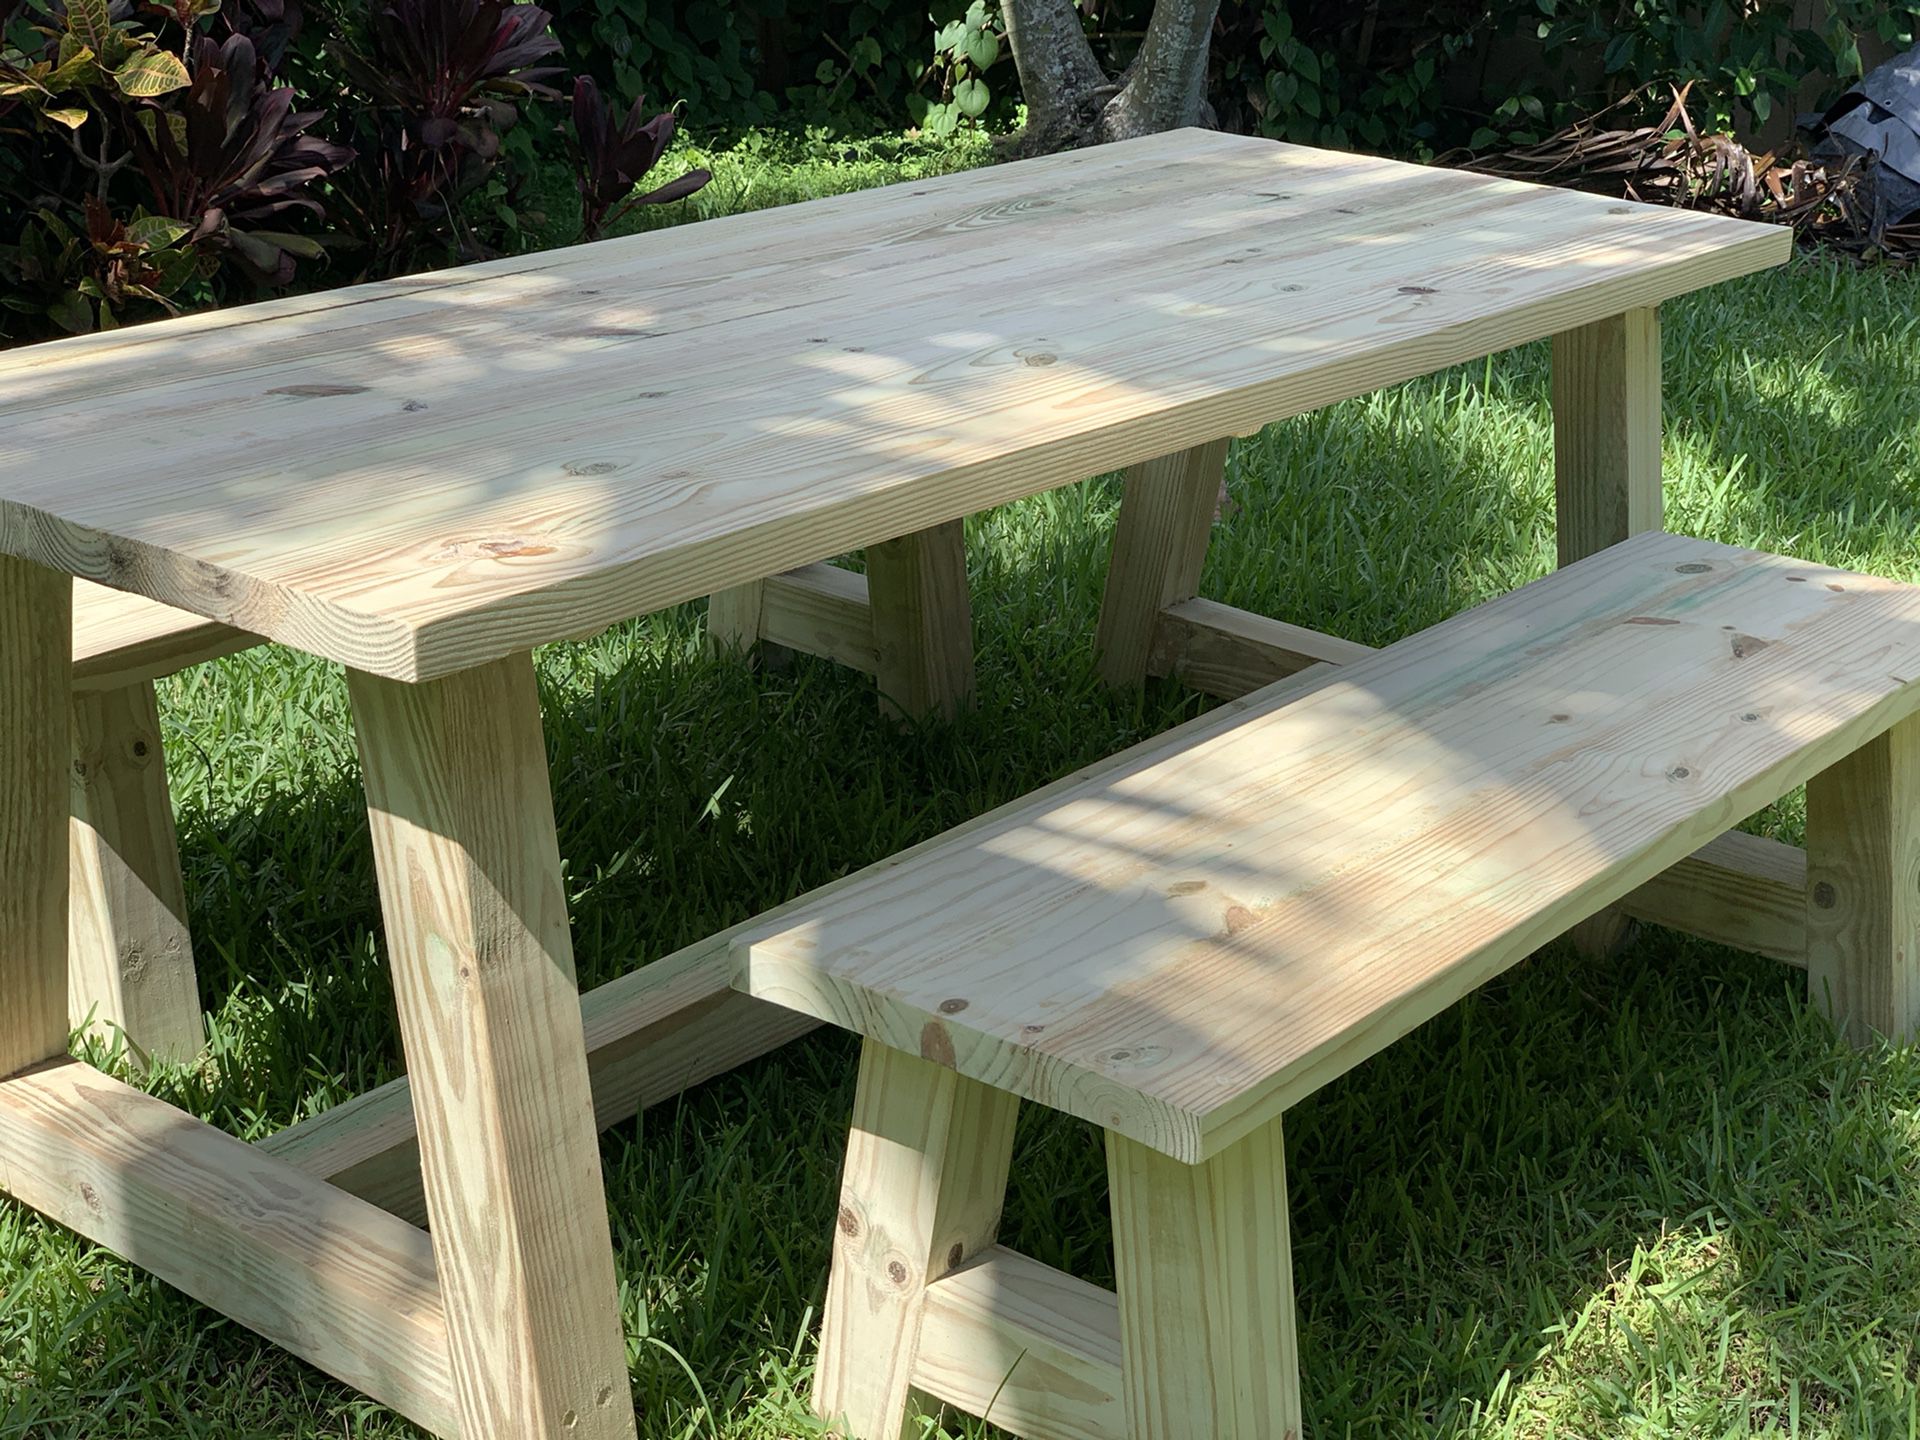 Exterior and Interior hand and custom made table “Erika” for patio, dining, picnic, restaurant